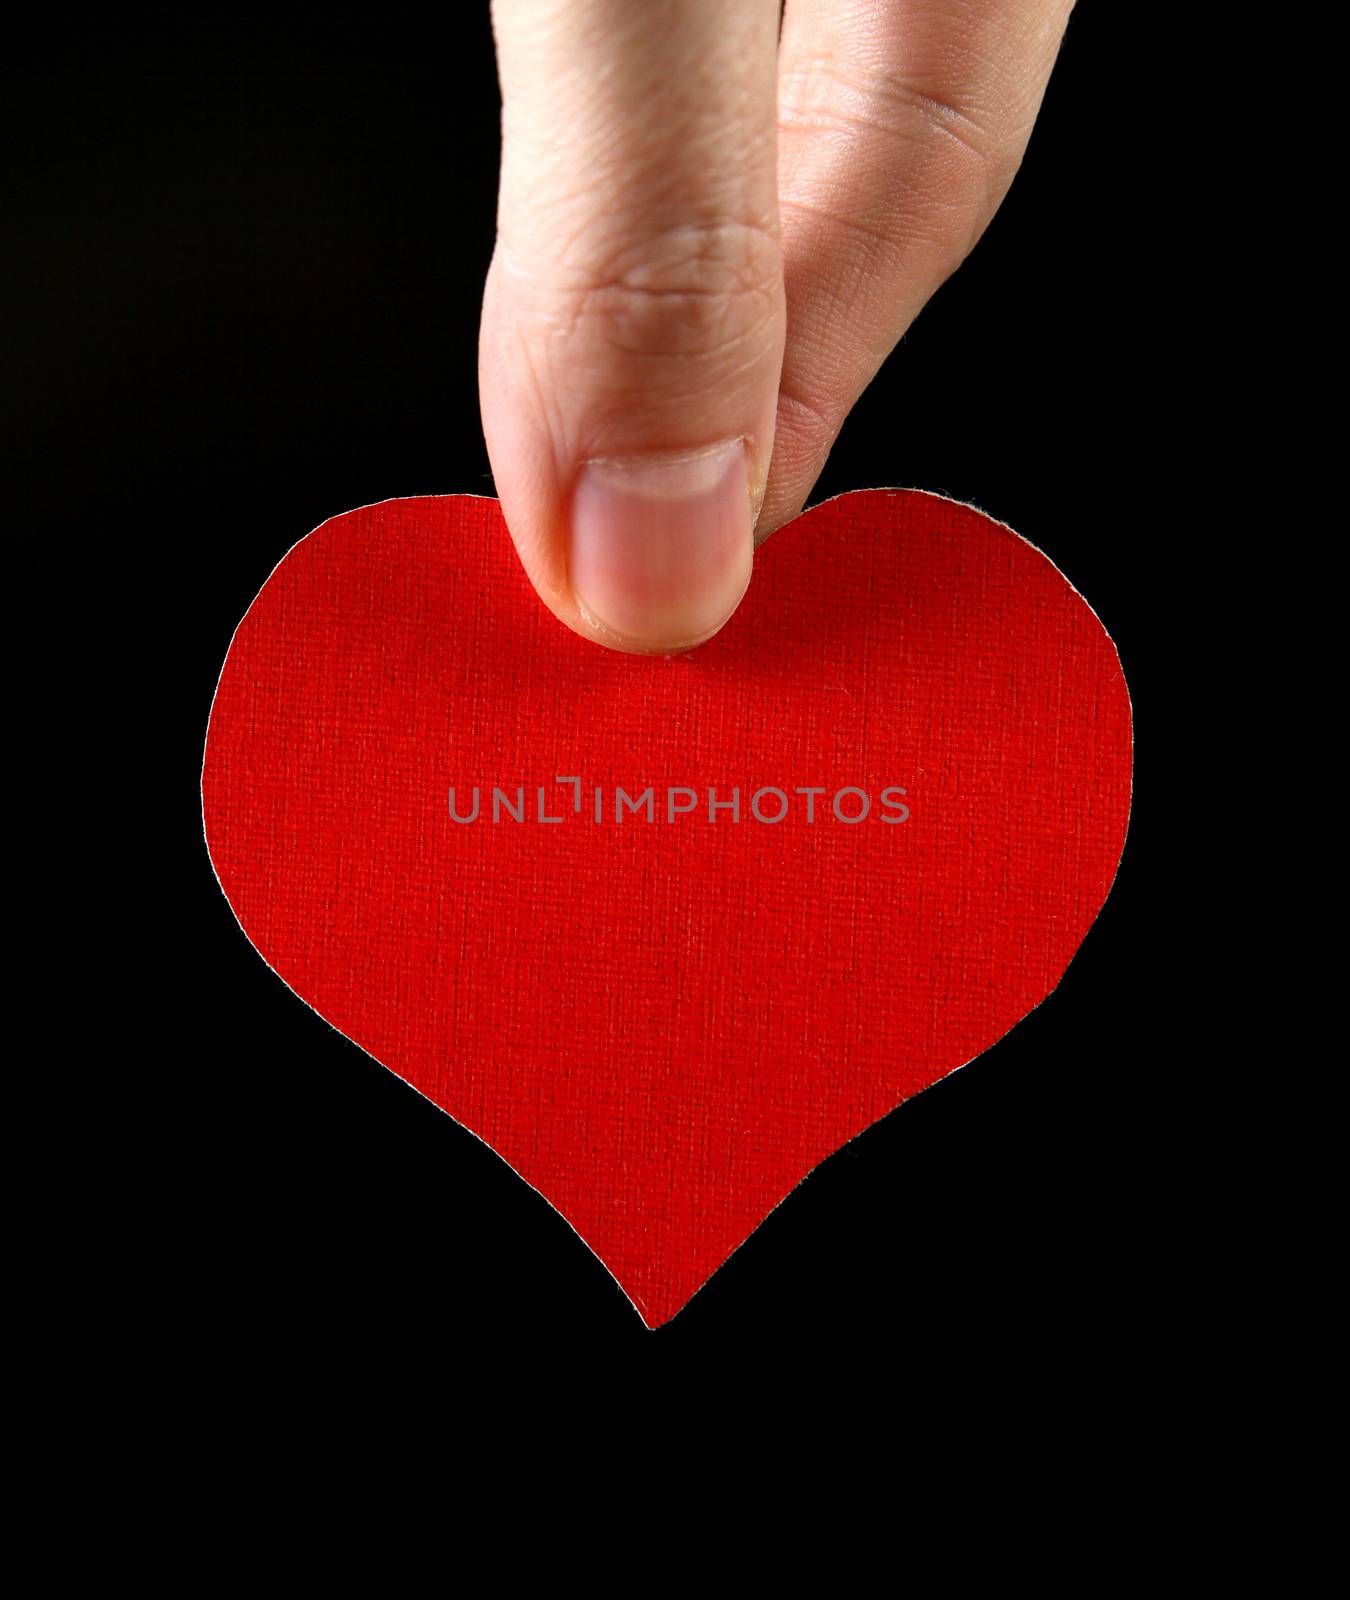 Heart Shape in the Hand by sabphoto